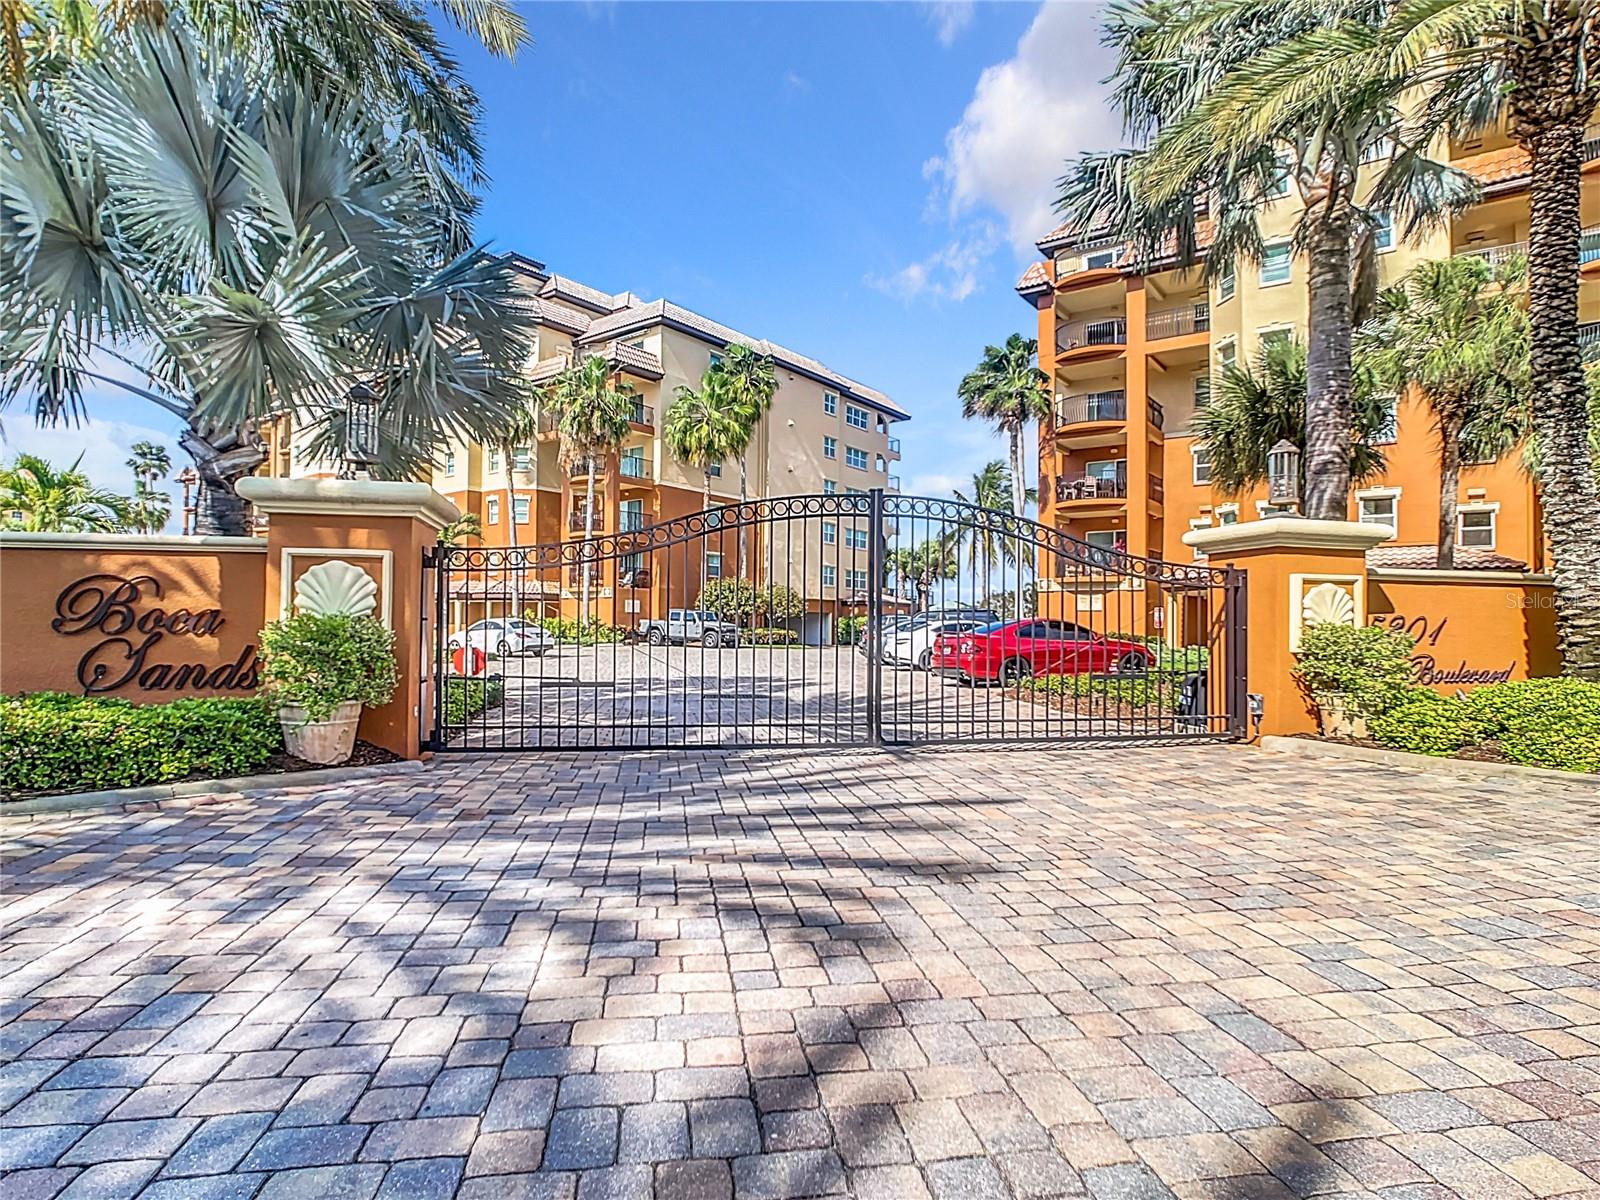 Boca Sands is a safe and secure gated community.